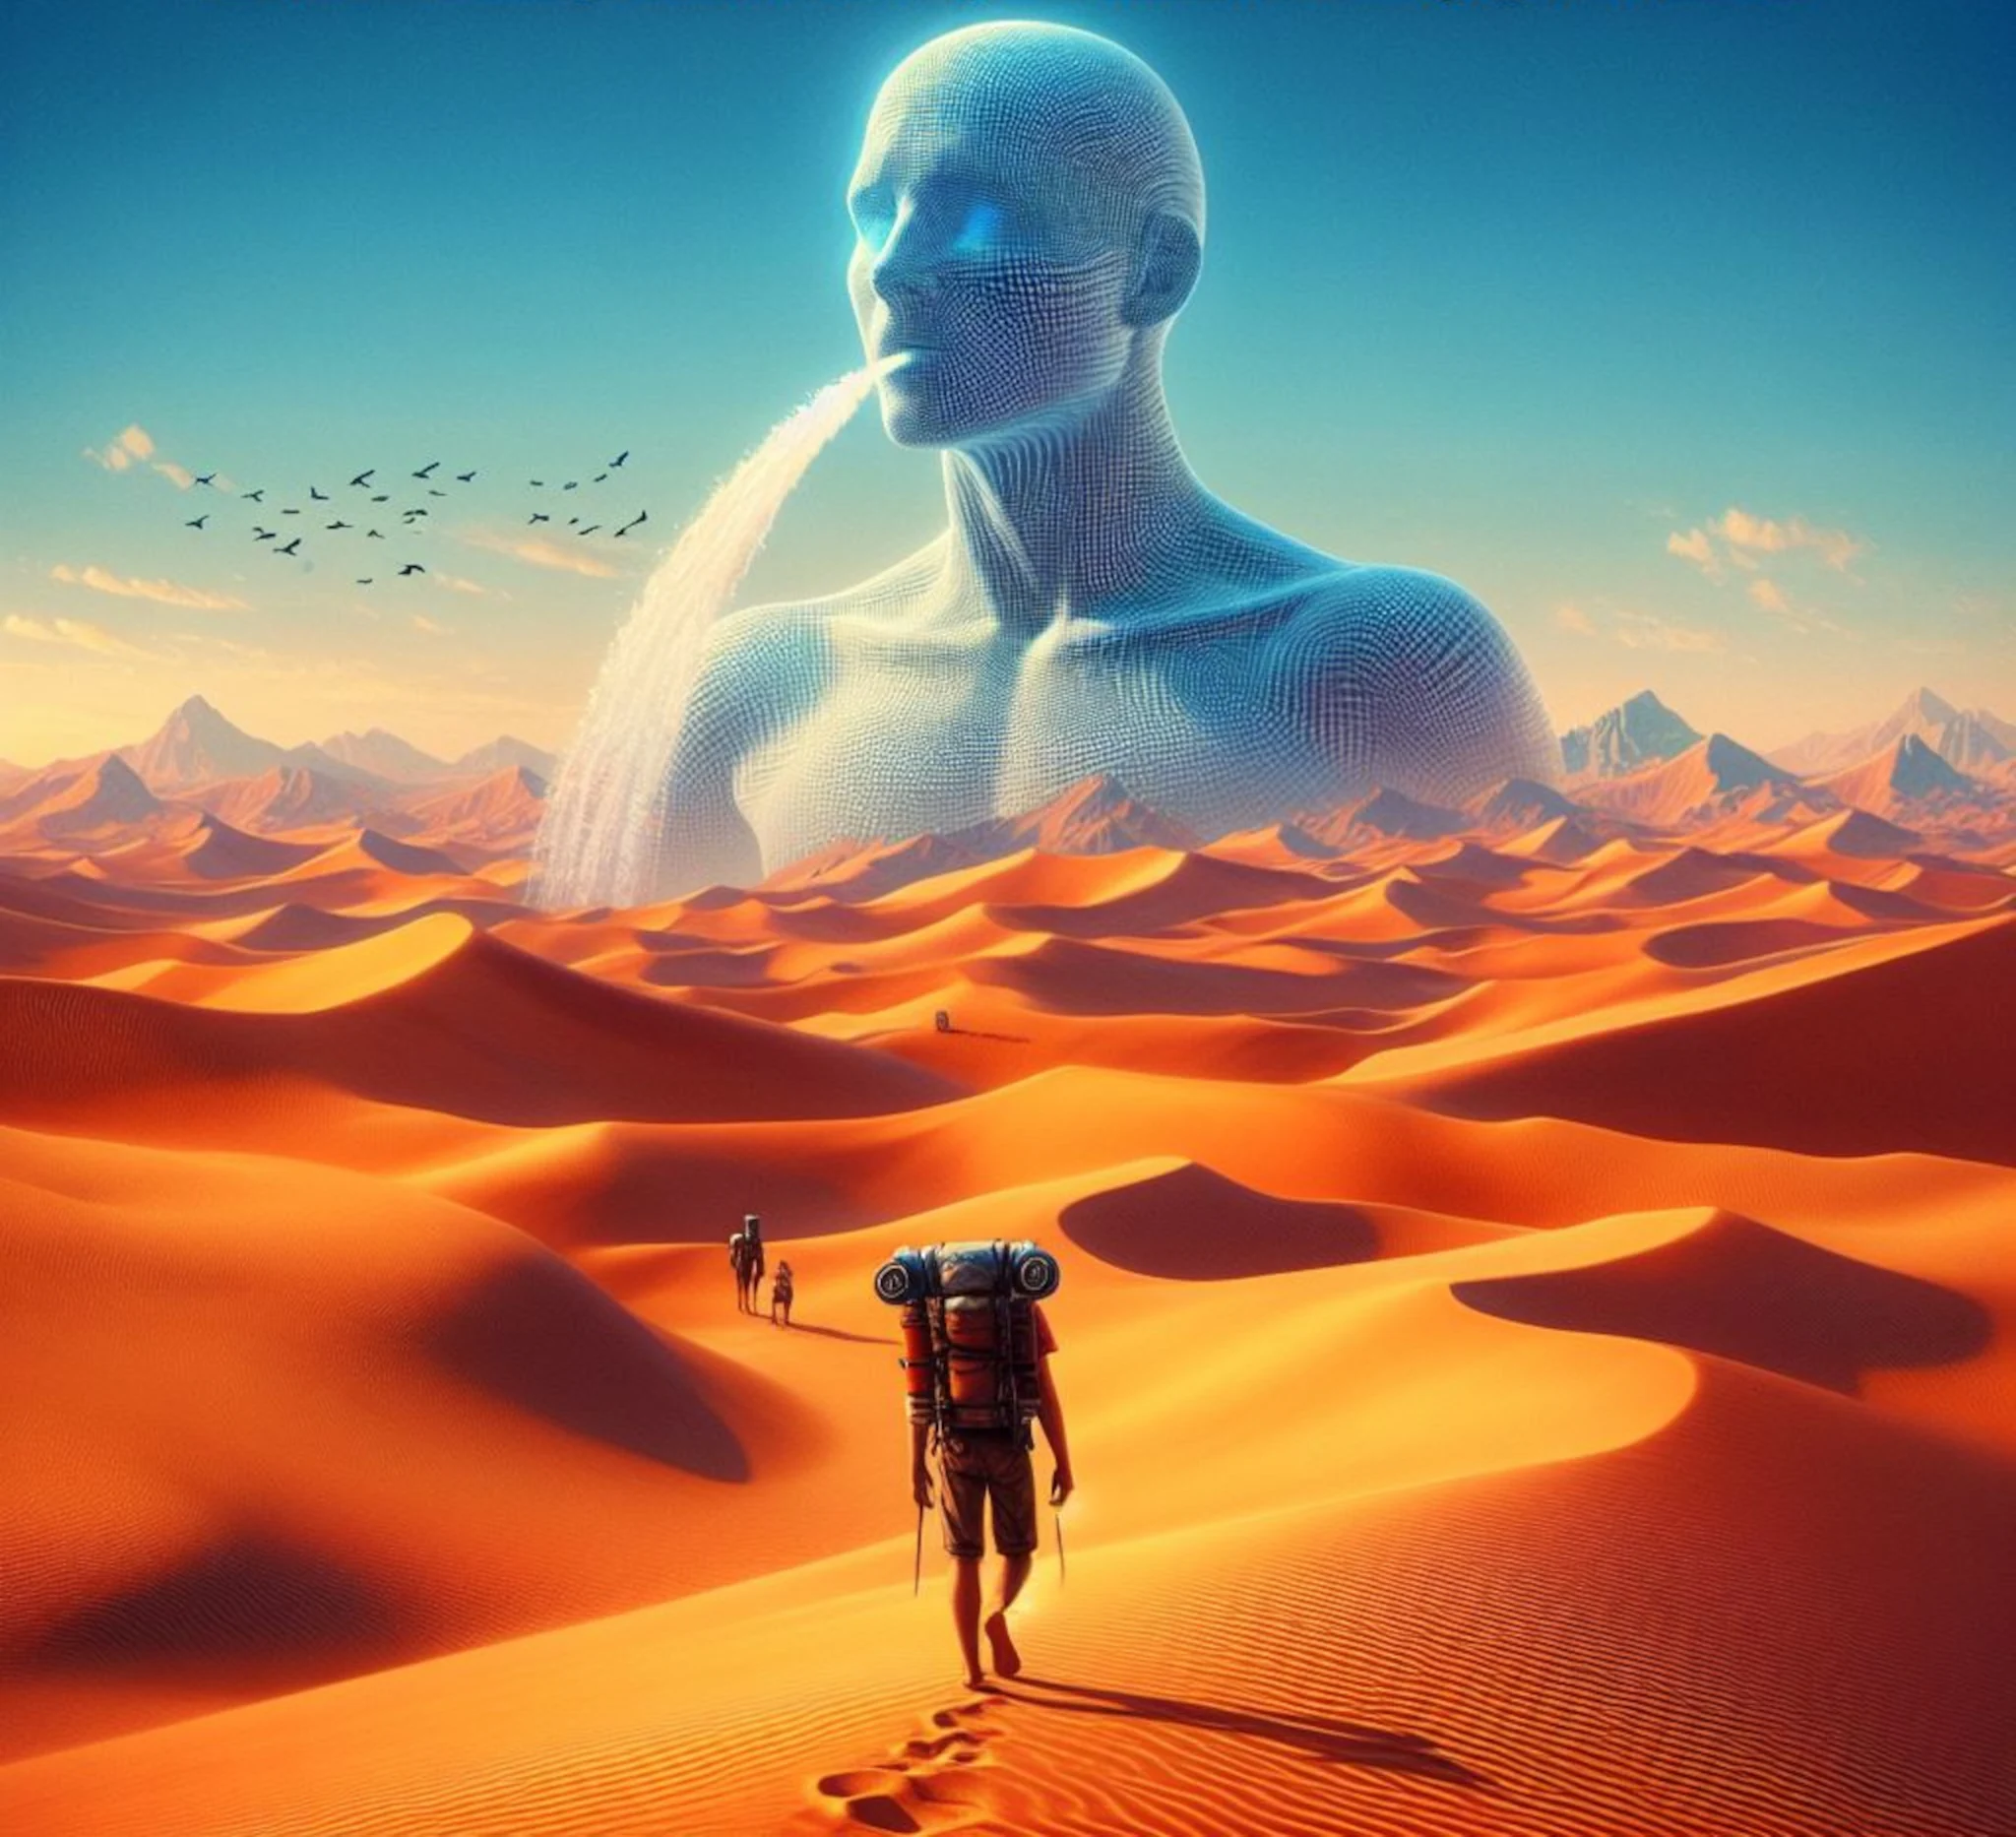 Wanderer heading towards the illusion of an oasis in a scorching desert, as illustrated by DALL·E 3.